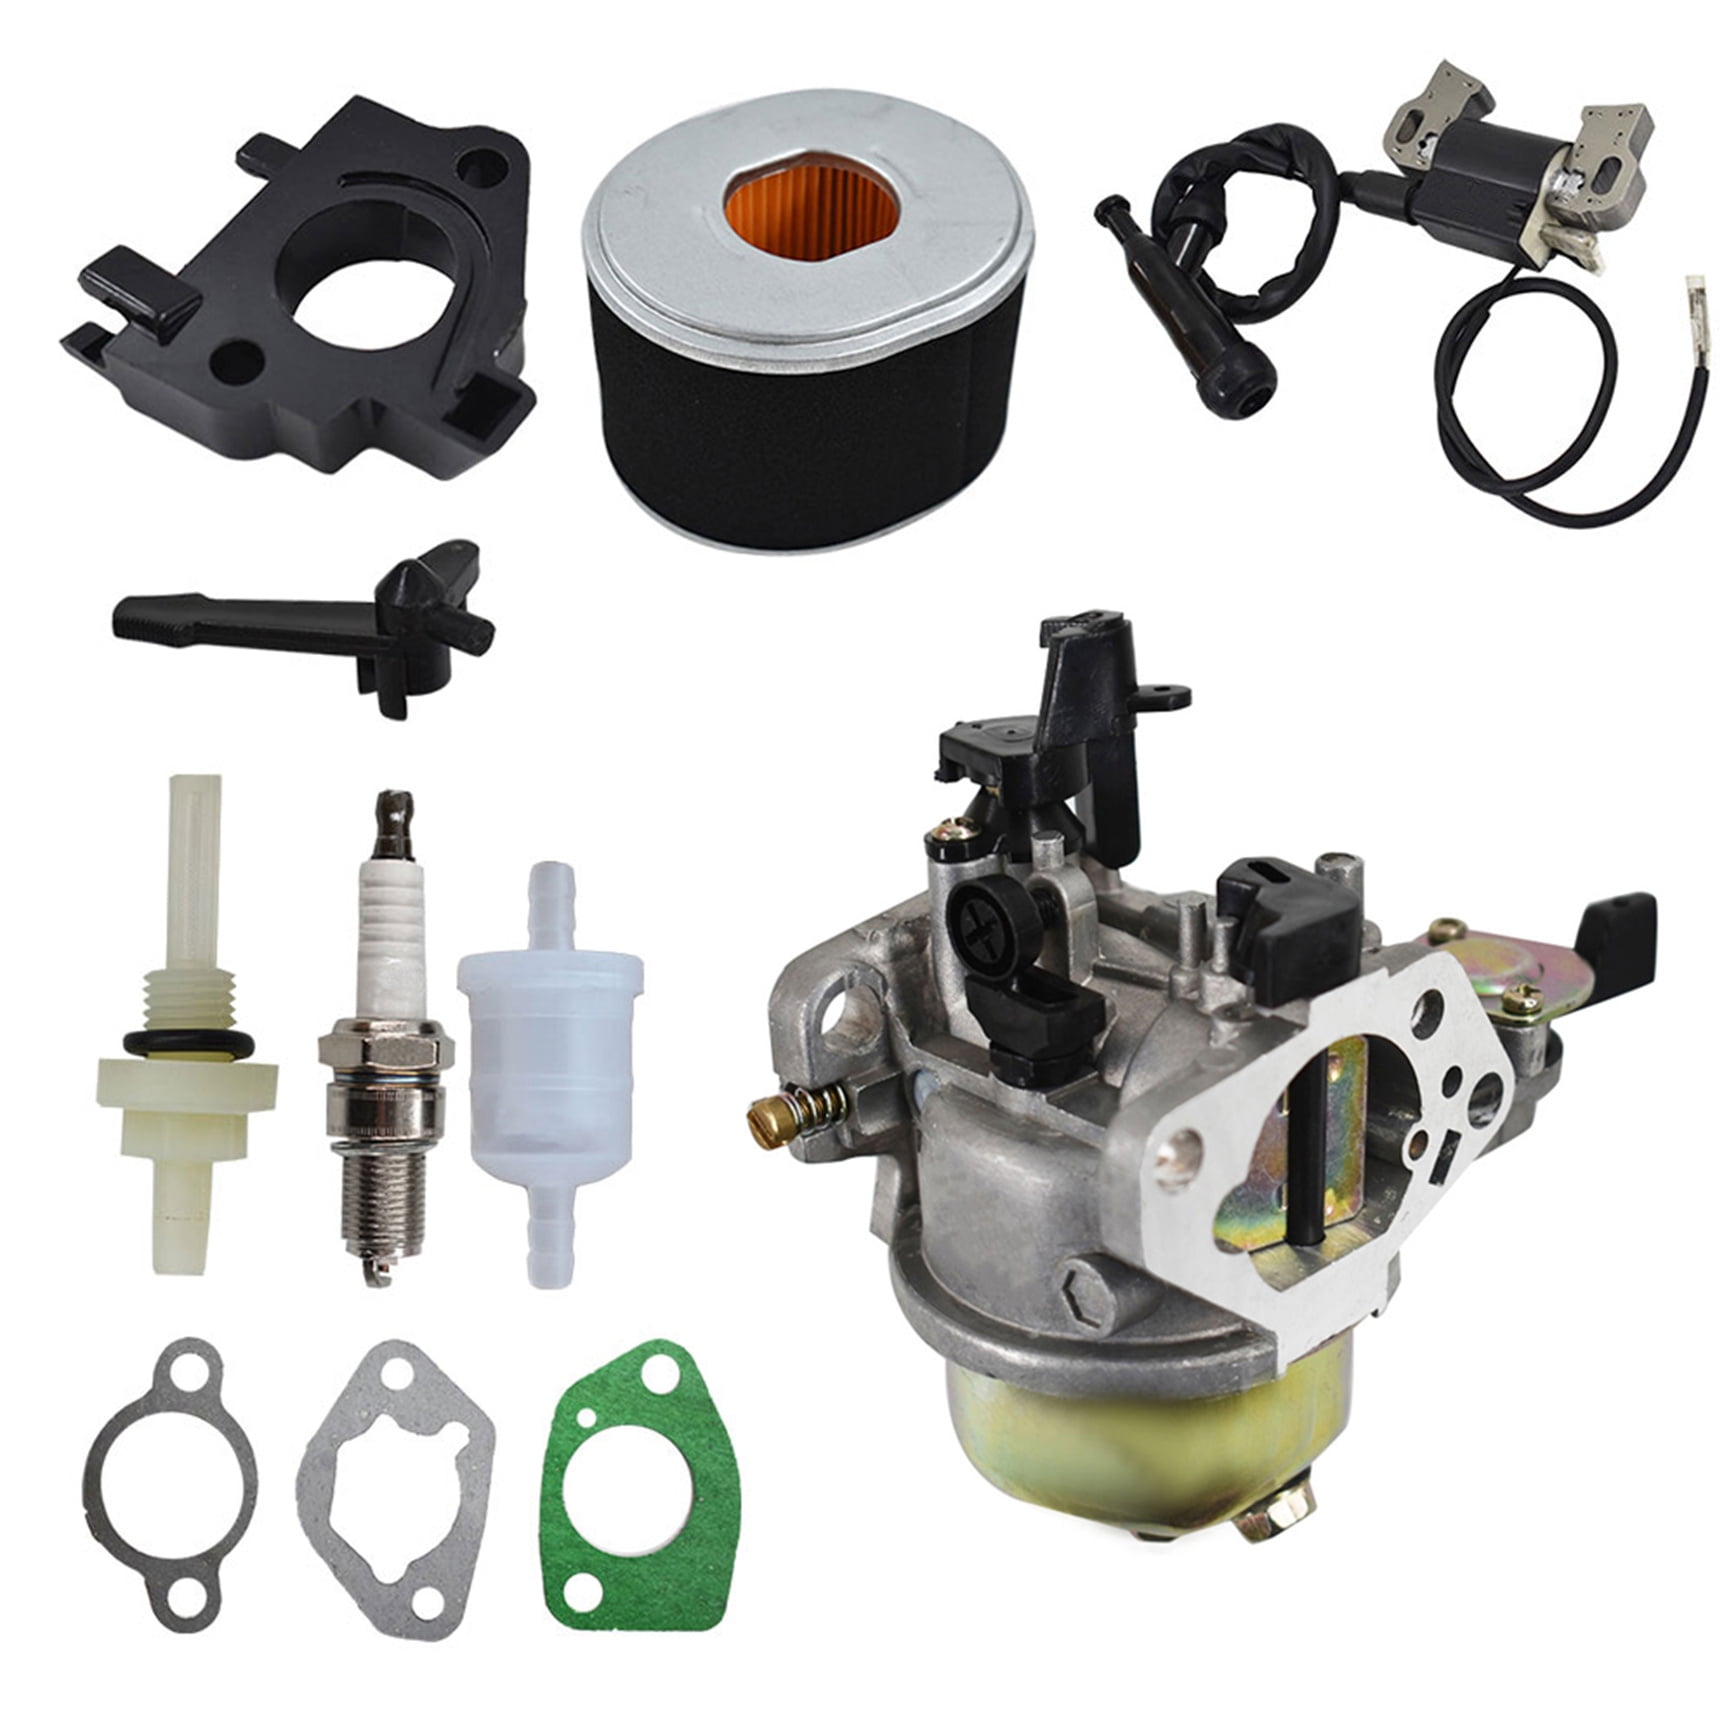  Powtol GX390 13HP Carburetor for Honda GX340 11HP GX 390  Engines Replace 16100-ZF6-V01 with 17210-ZE3-505 Air Filter Repower Kit :  Patio, Lawn & Garden